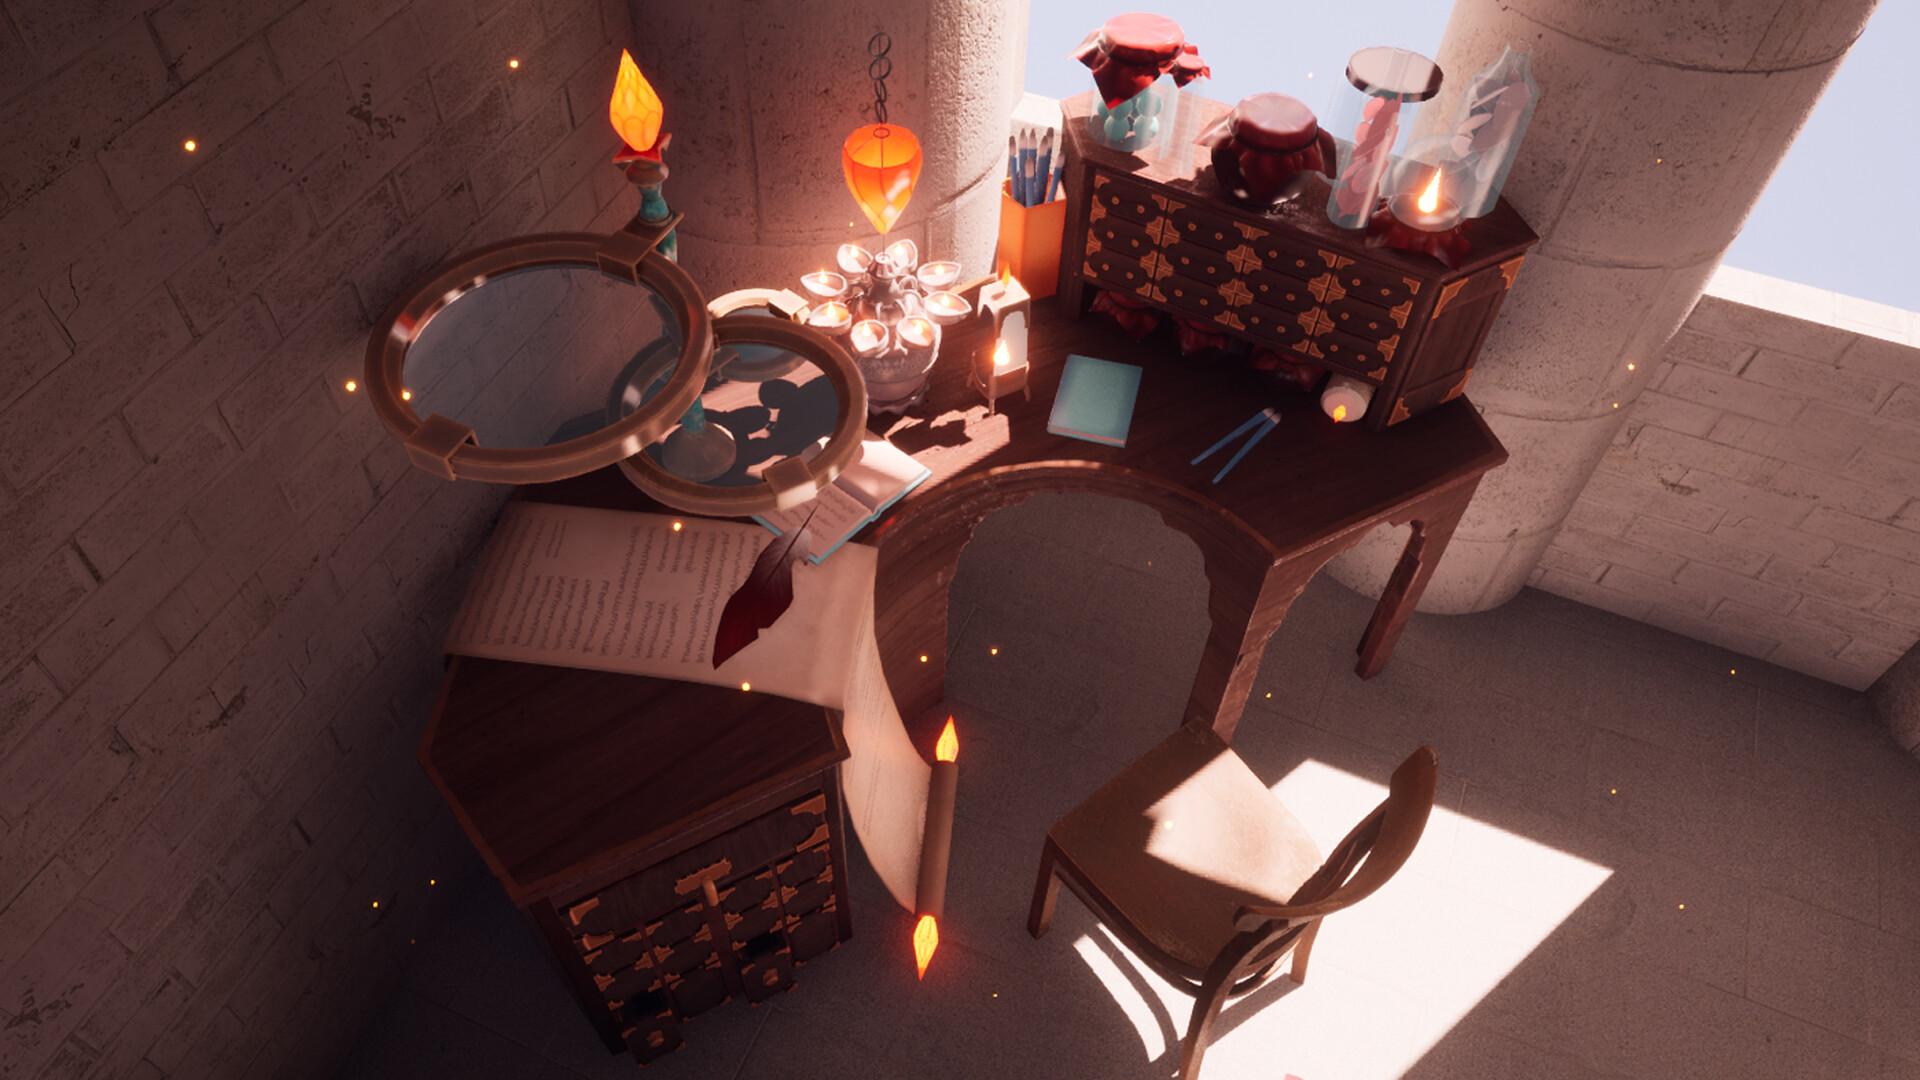 "Ambrosia Princess Desk" game asset created by AET student Catherine Crawford in Unreal Engine 5